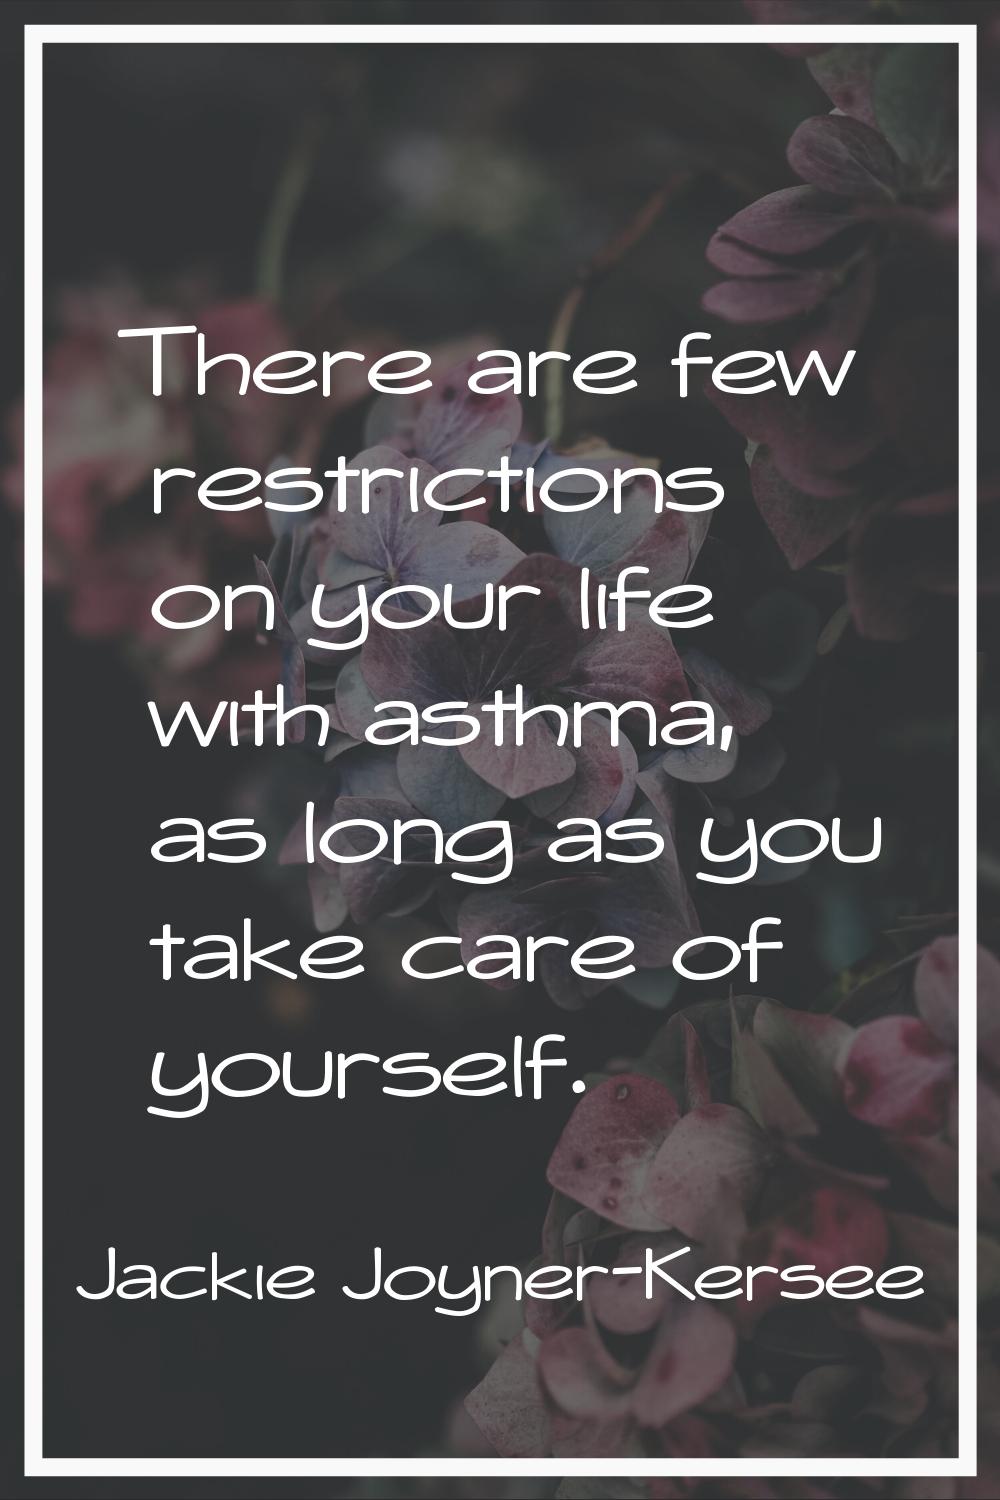 There are few restrictions on your life with asthma, as long as you take care of yourself.